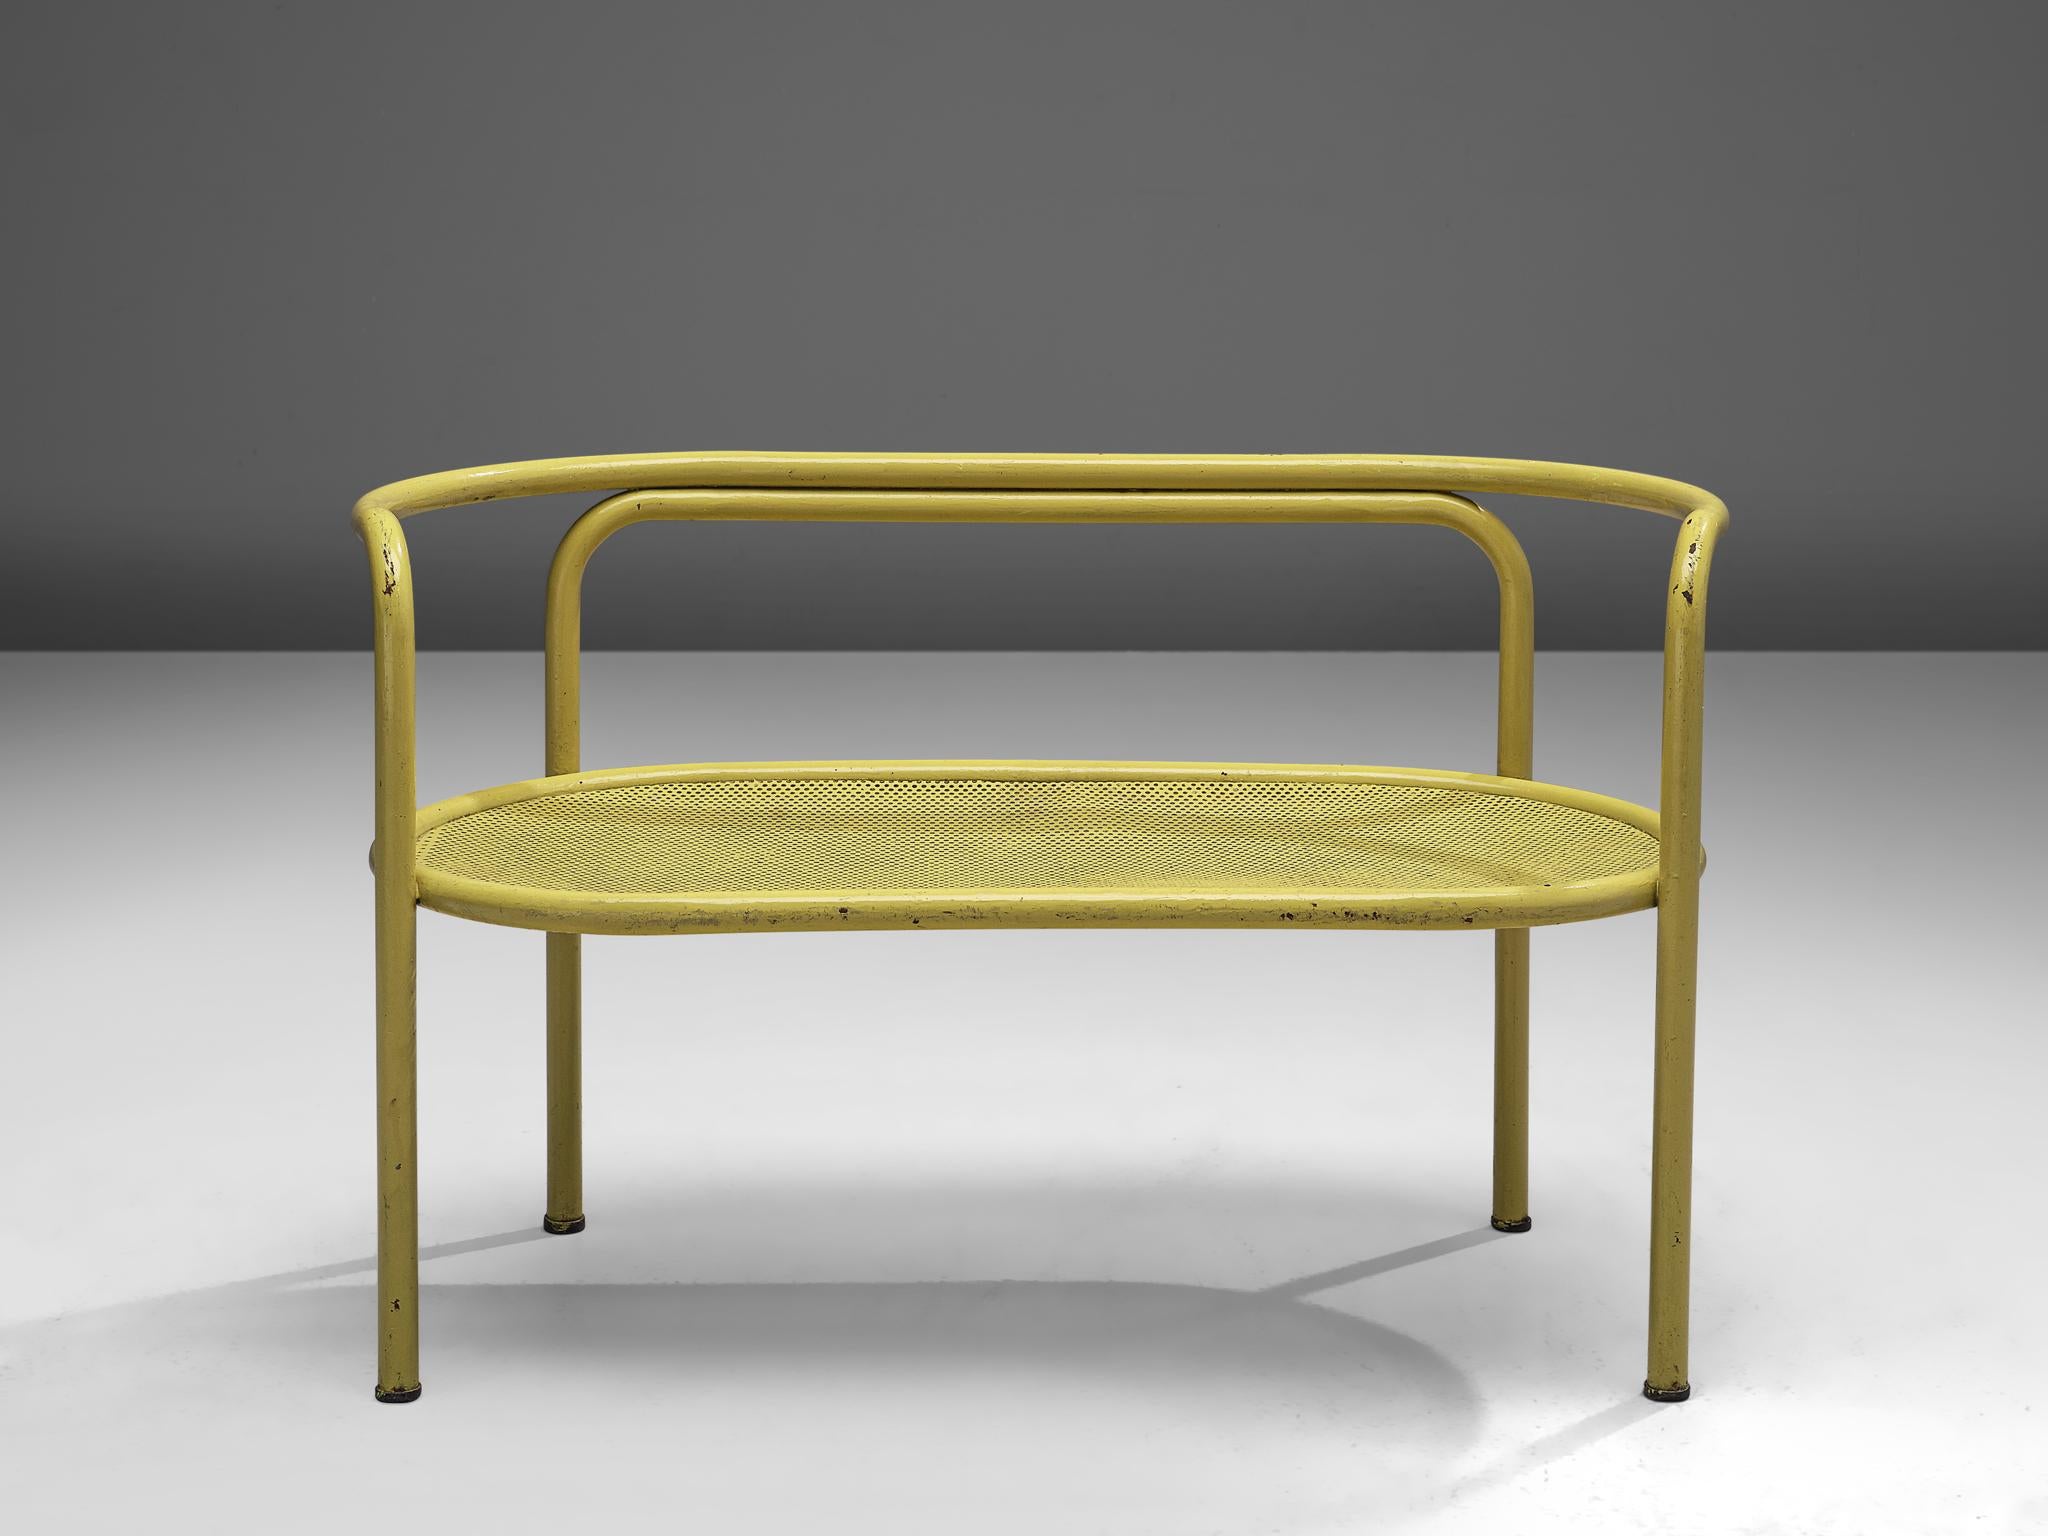 Gae Aulenti for Poltronova, 'Locus Solus' sofa, lacquered tubular steel, fabric, Italy, 1964

Do you also love the movie La Piscine? You can bring its famous poolside furniture to your own garden. This bench is designed by Gae Aulenti and produced